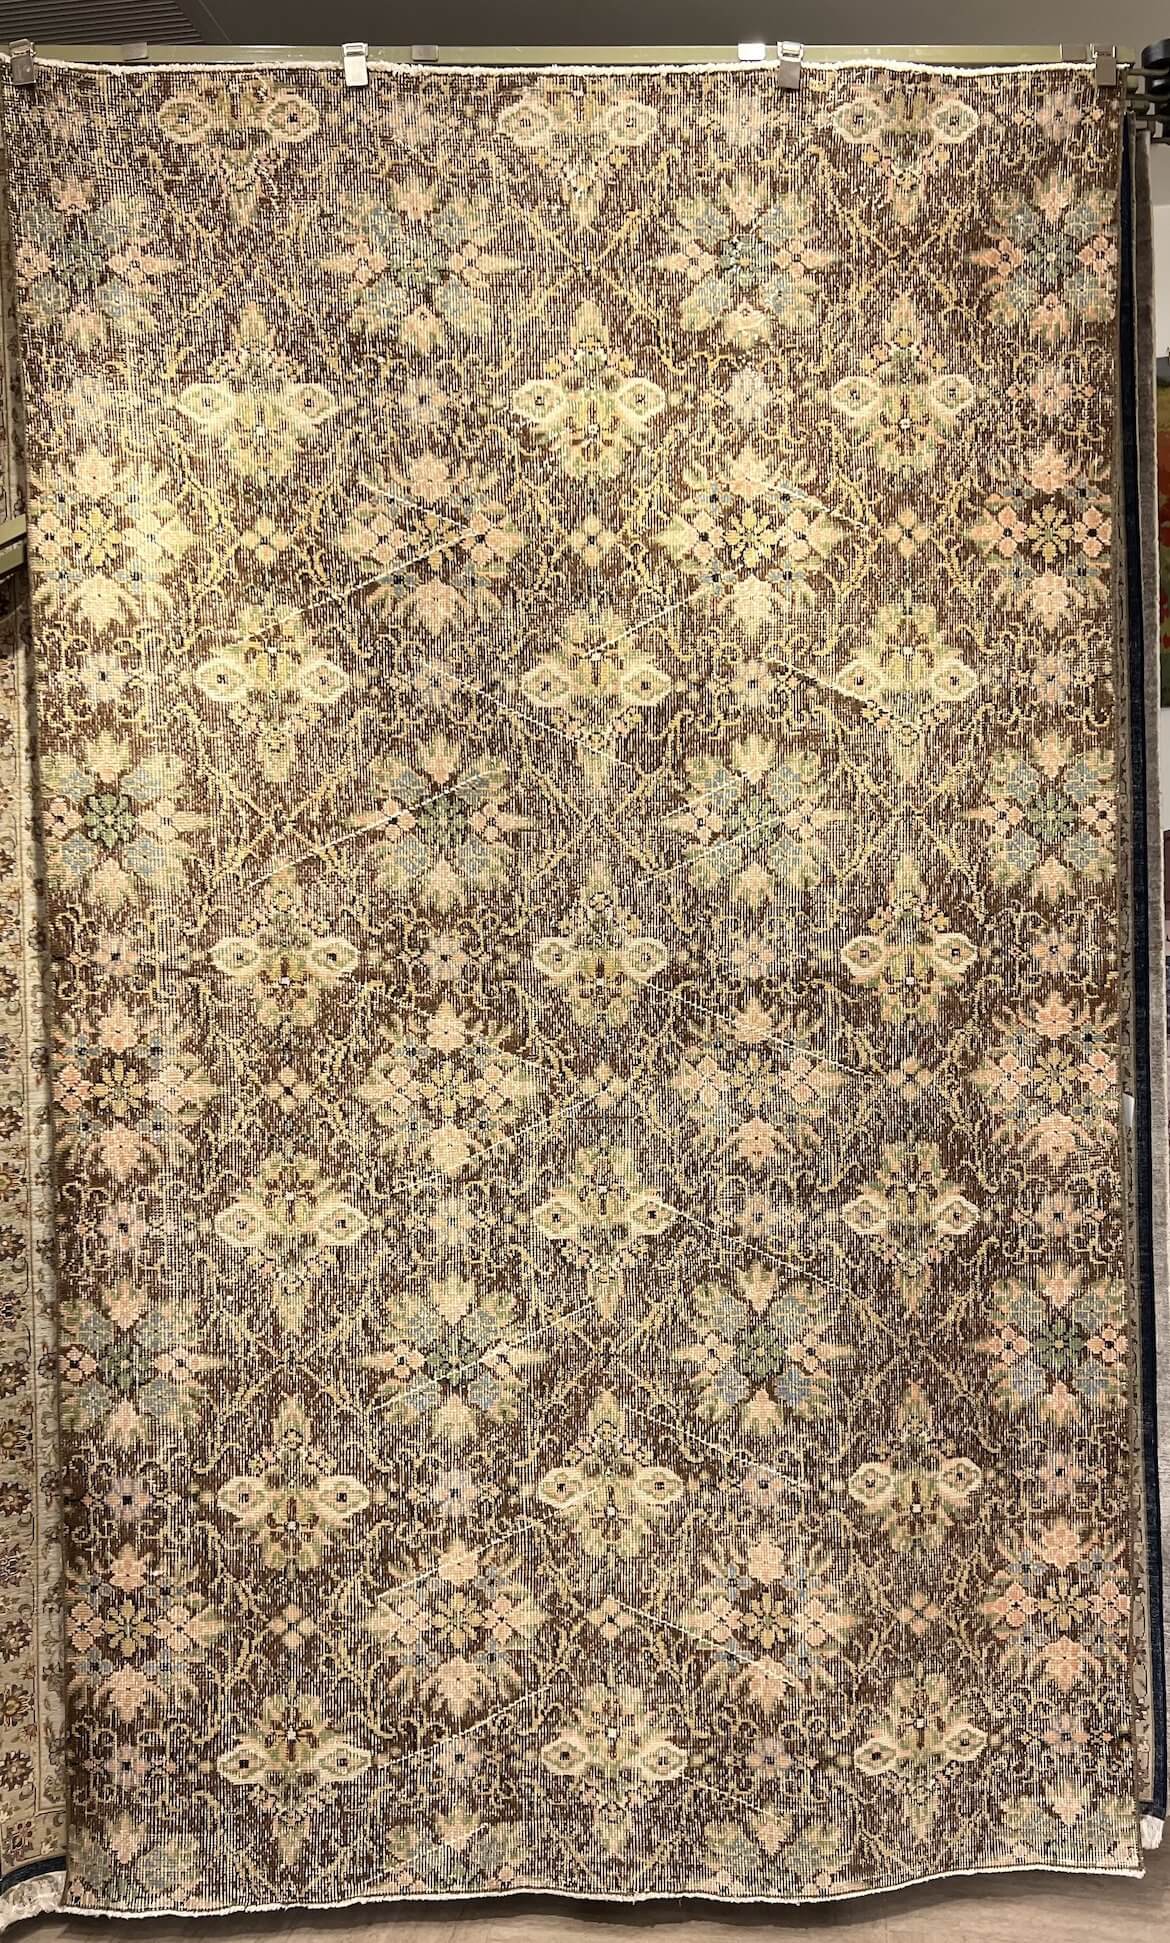 Fine Handmade Turkish Wool Carpet With An Antique Design product image #27556647600298